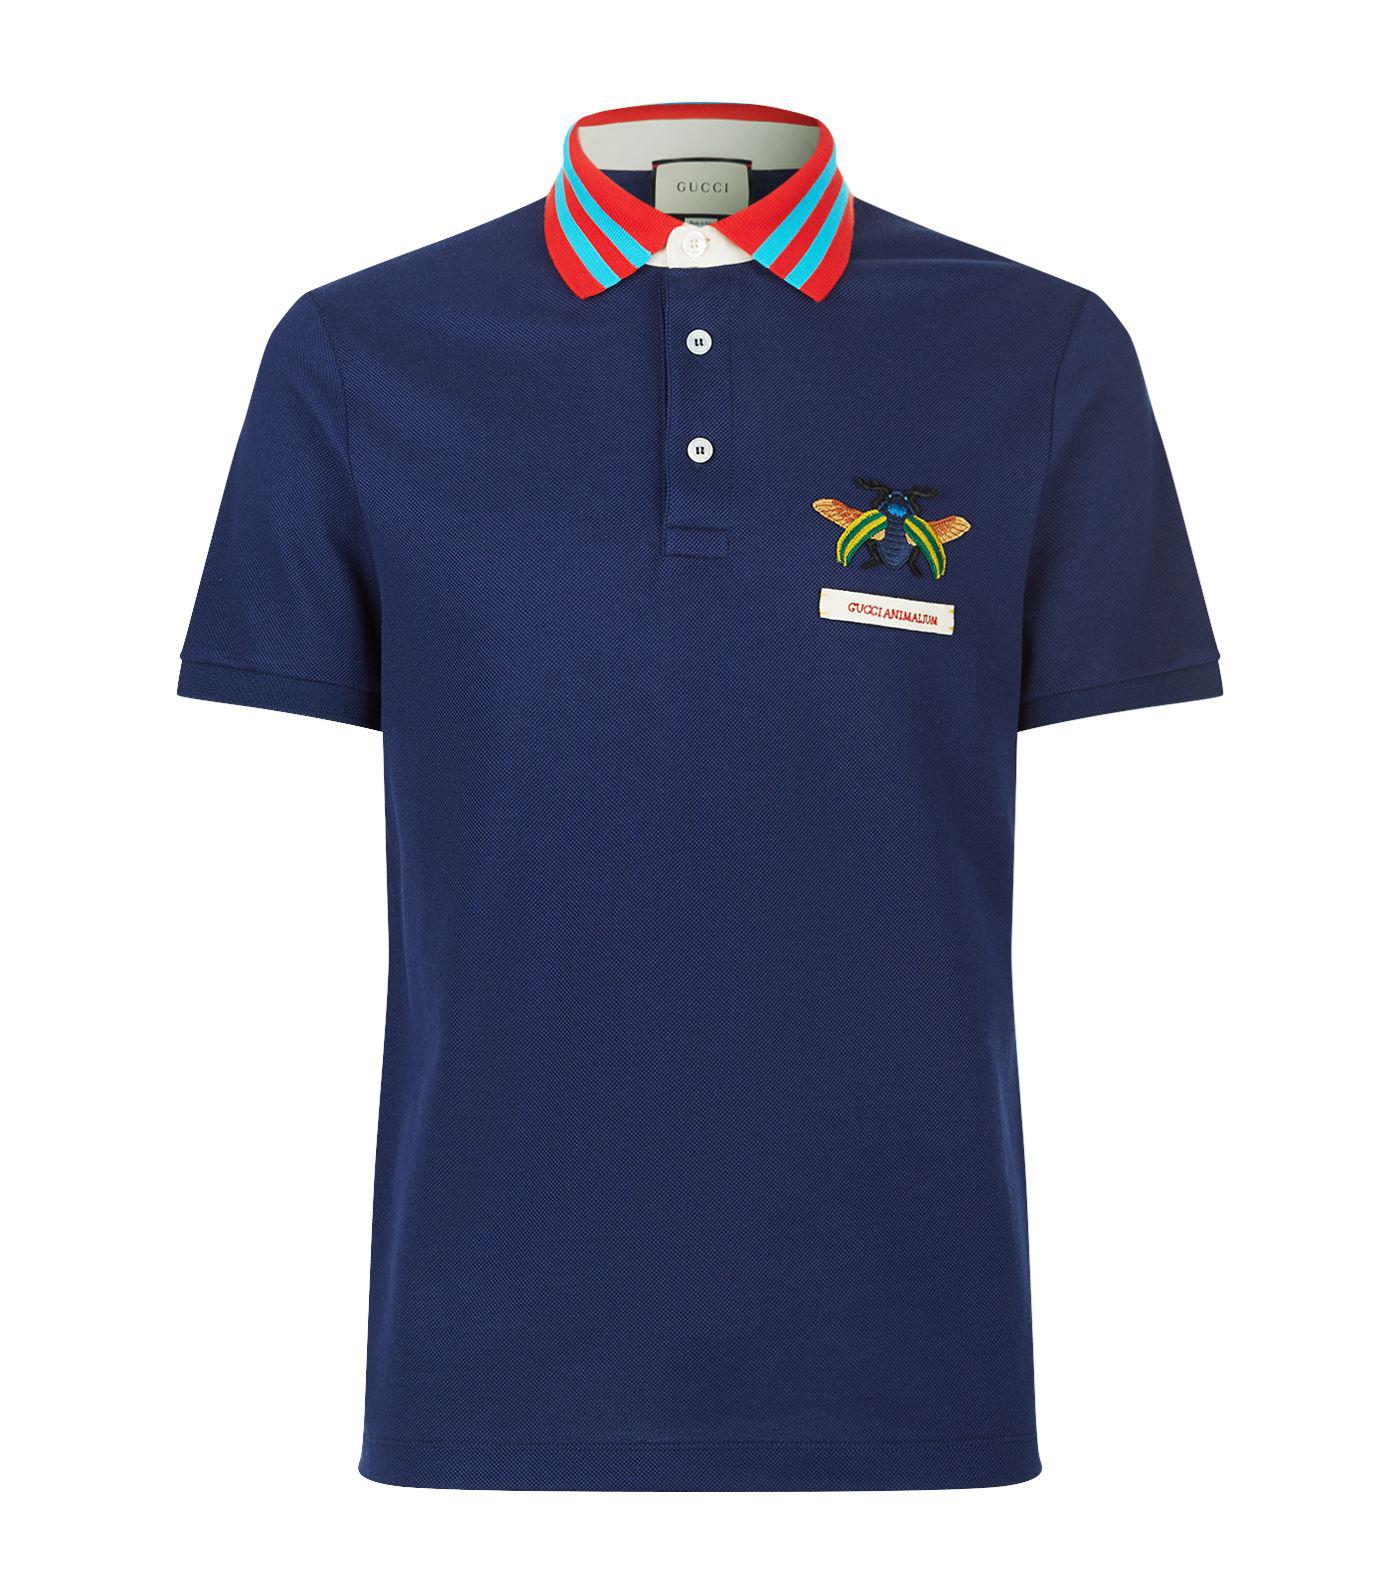 Gucci Cotton Animalium Polo Shirt in Navy (Blue) for Men - Lyst